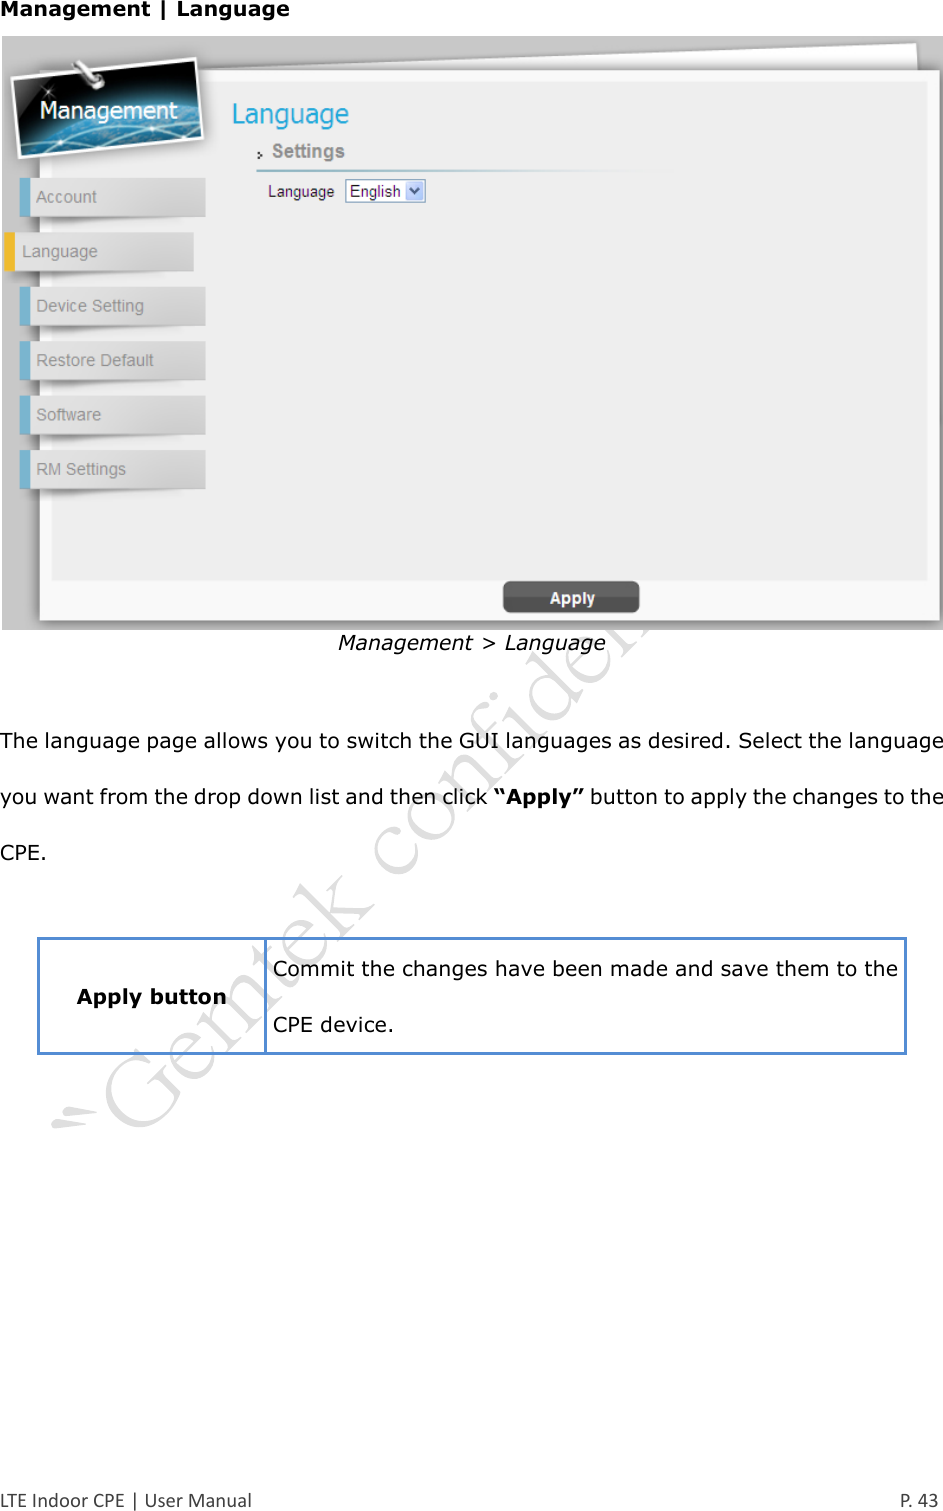  LTE Indoor CPE | User Manual      P. 43 Management | Language  Management &gt; Language  The language page allows you to switch the GUI languages as desired. Select the language you want from the drop down list and then click “Apply” button to apply the changes to the CPE.  Apply button Commit the changes have been made and save them to the CPE device.    